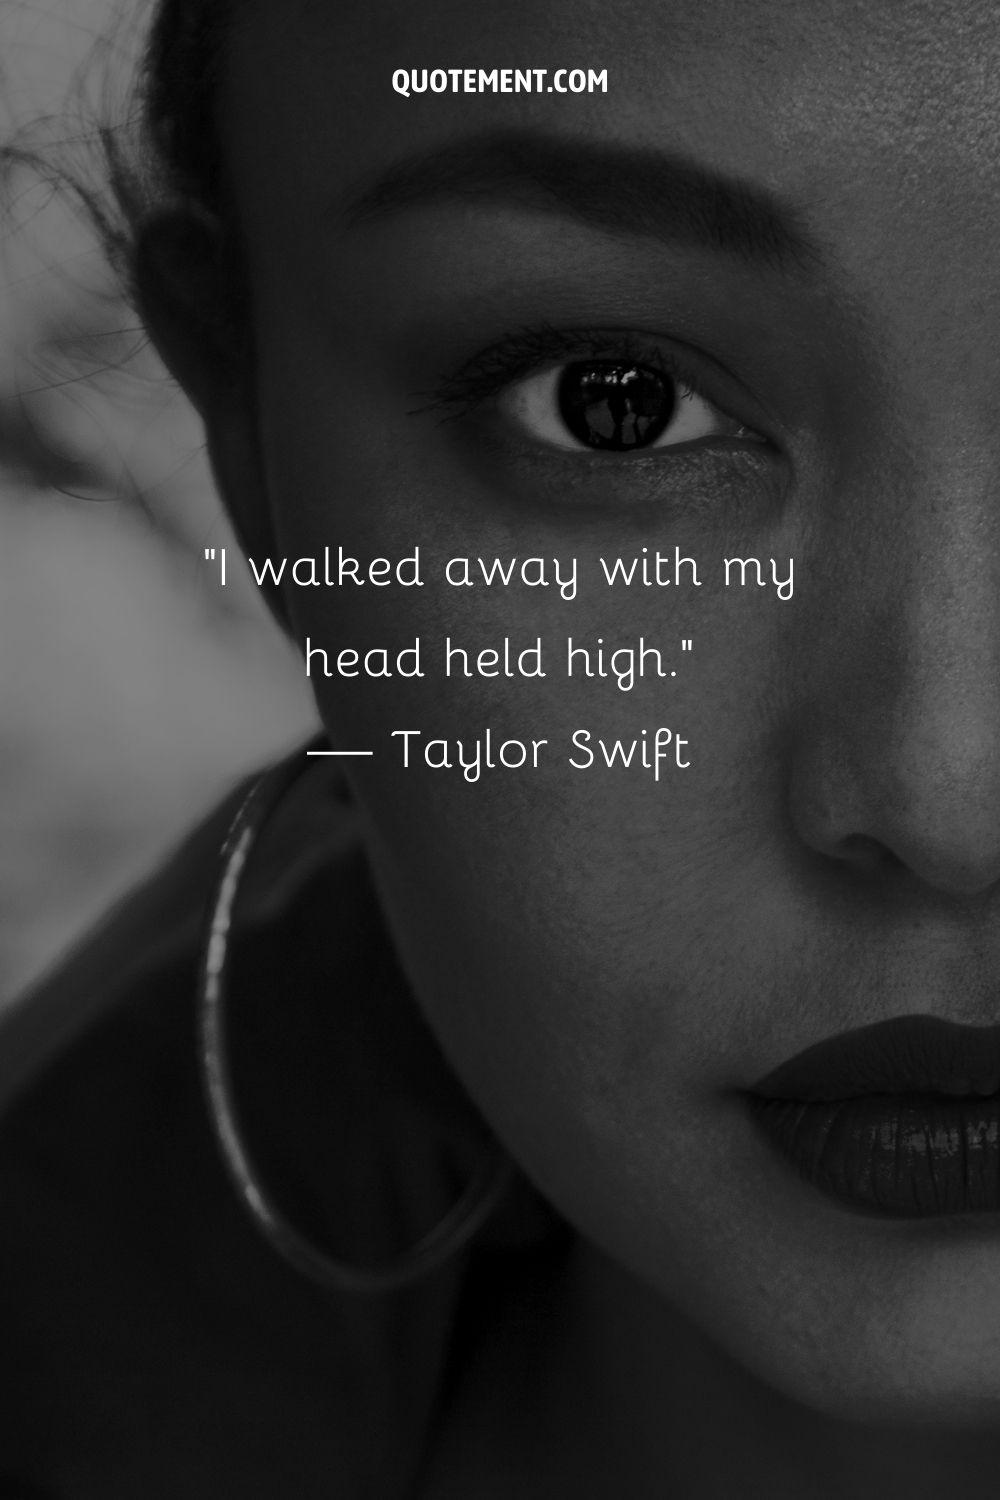 Determined eye, taylor swift quote representing stepping away quote